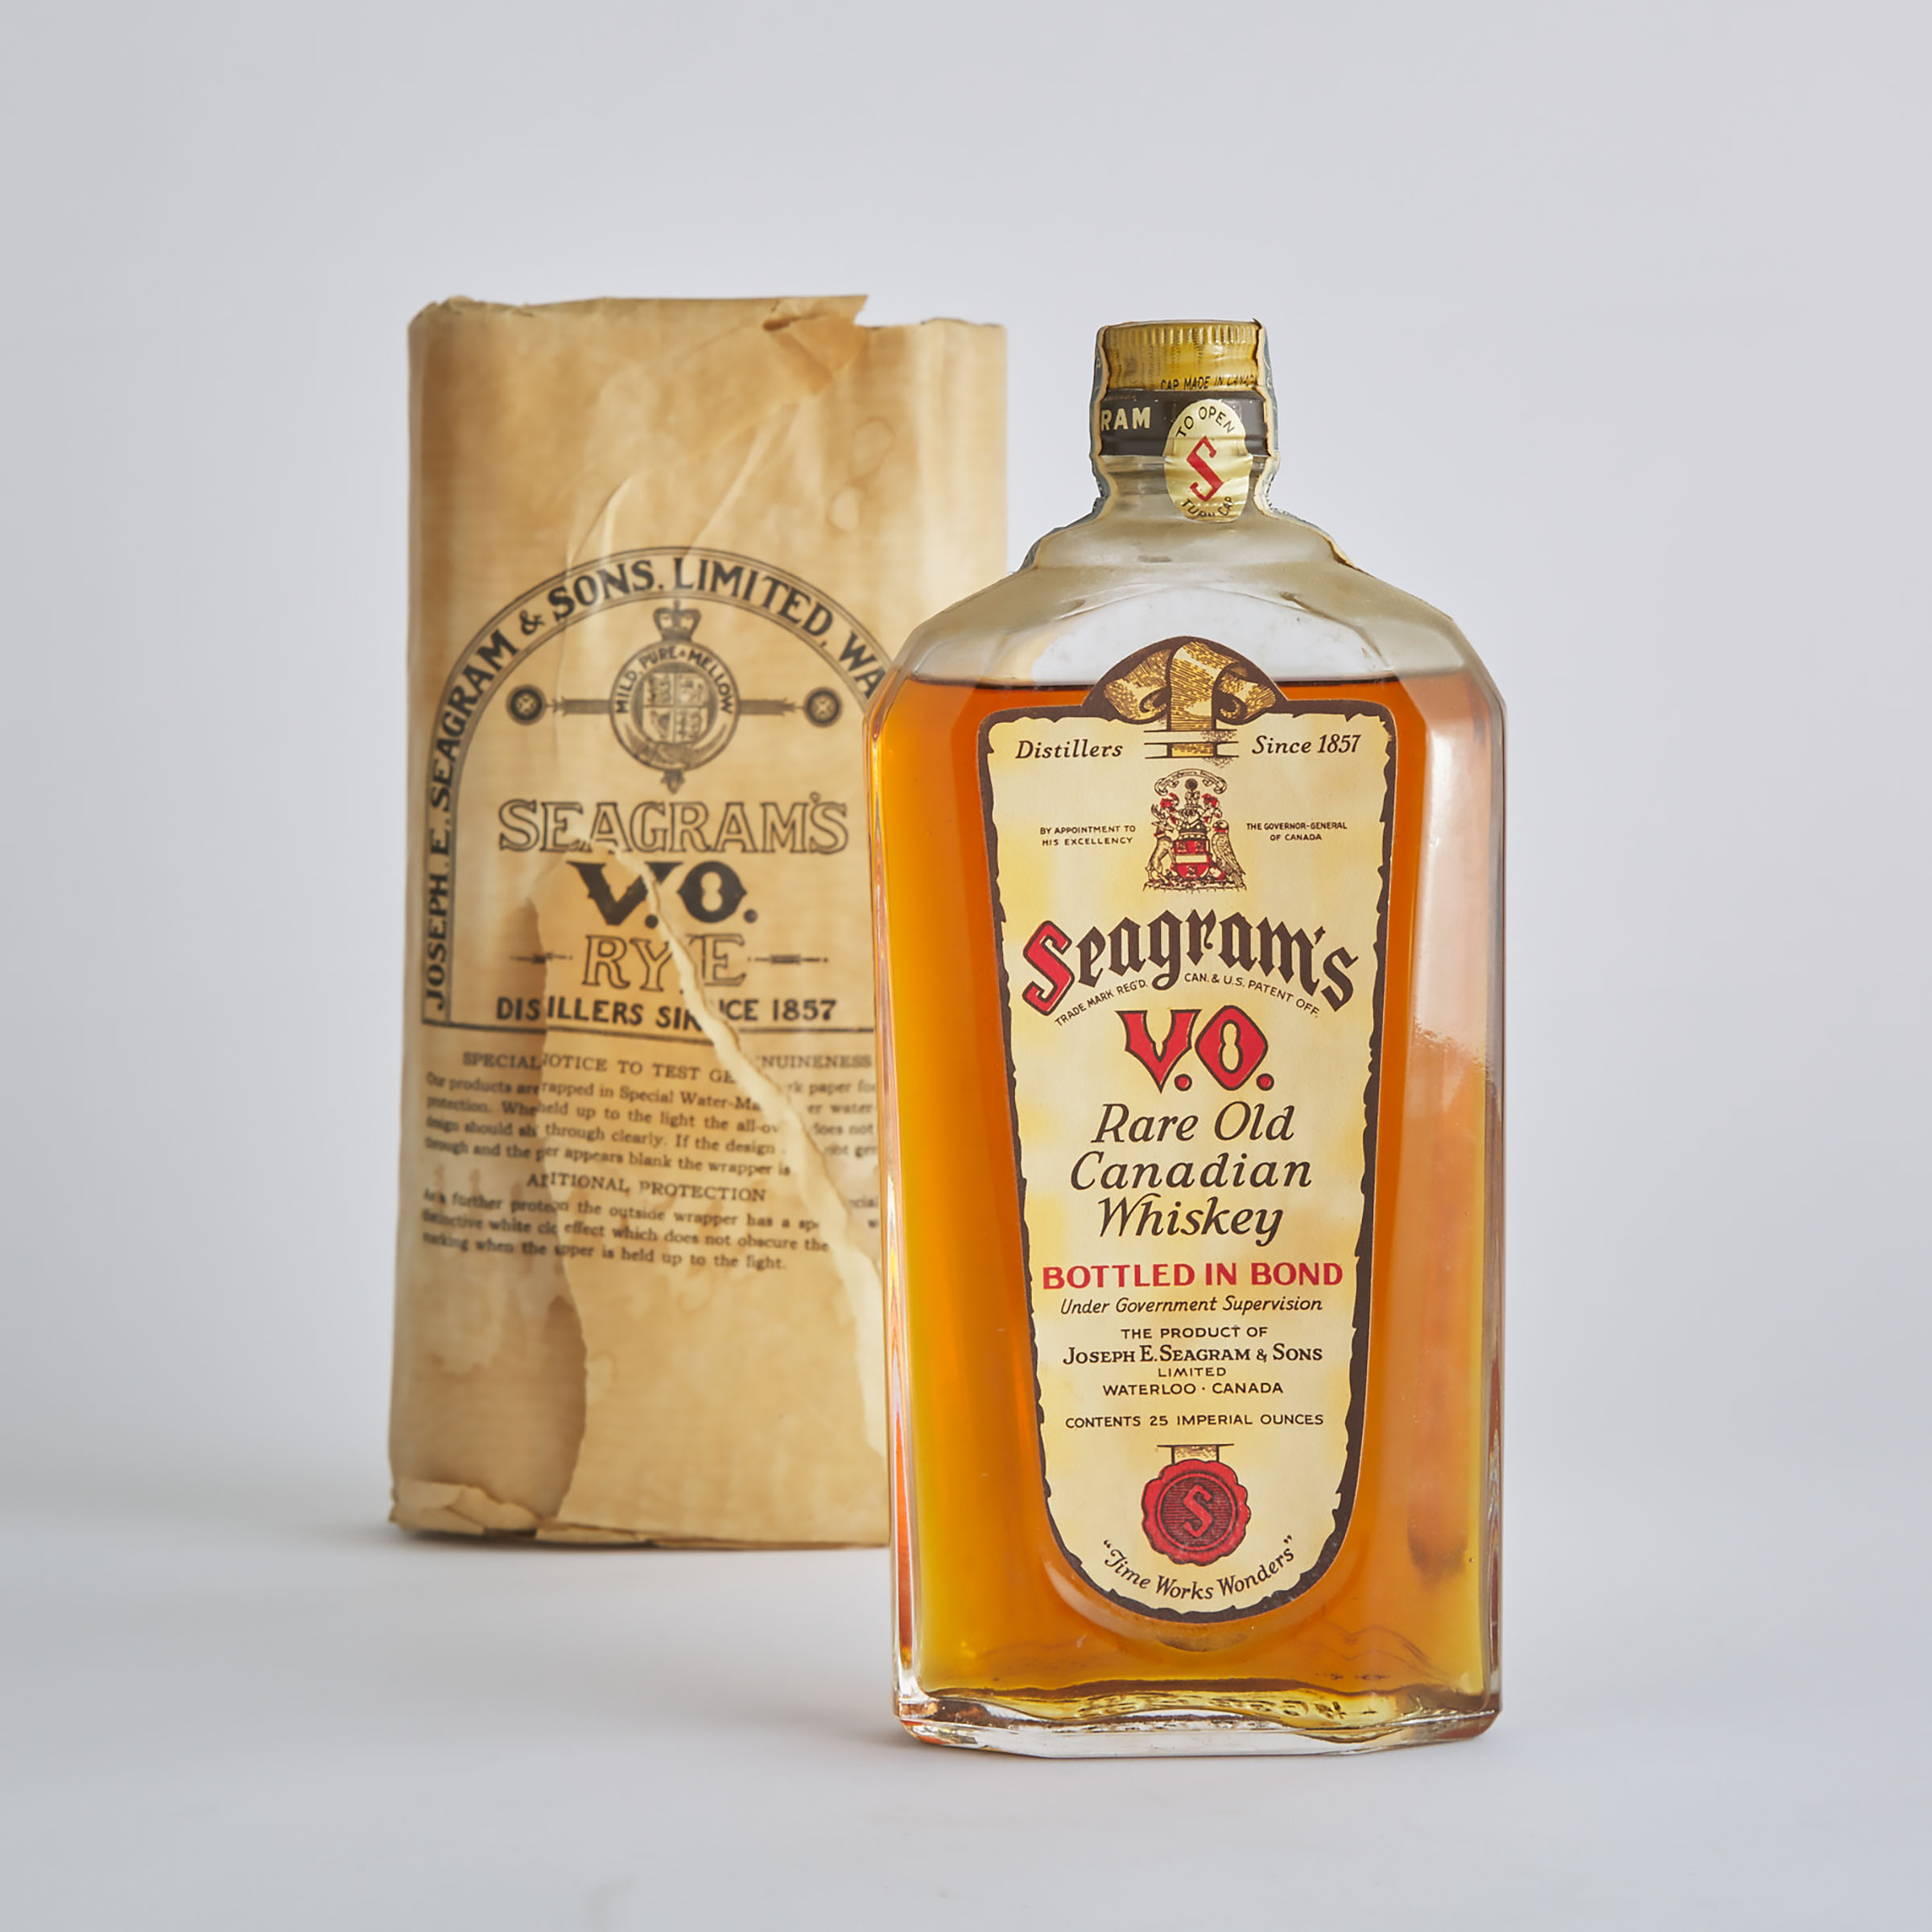 SEAGRAM'S V.O. RARE OLD CANADIAN WHISKEY (ONE 25 IMPERIAL OUNCES)